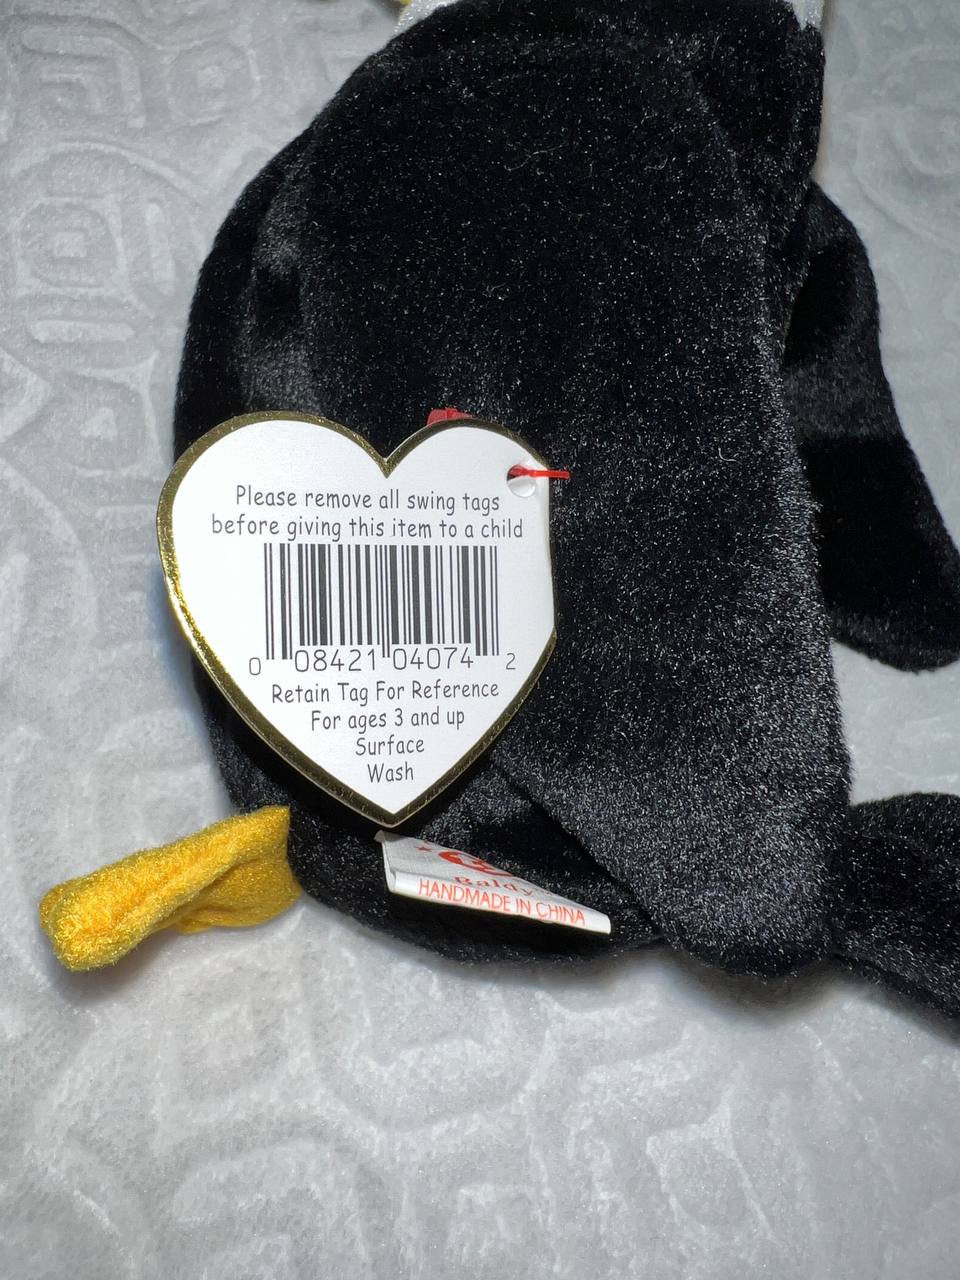 *RARE* MINT 1996 Baldy Beanie Baby With Tag